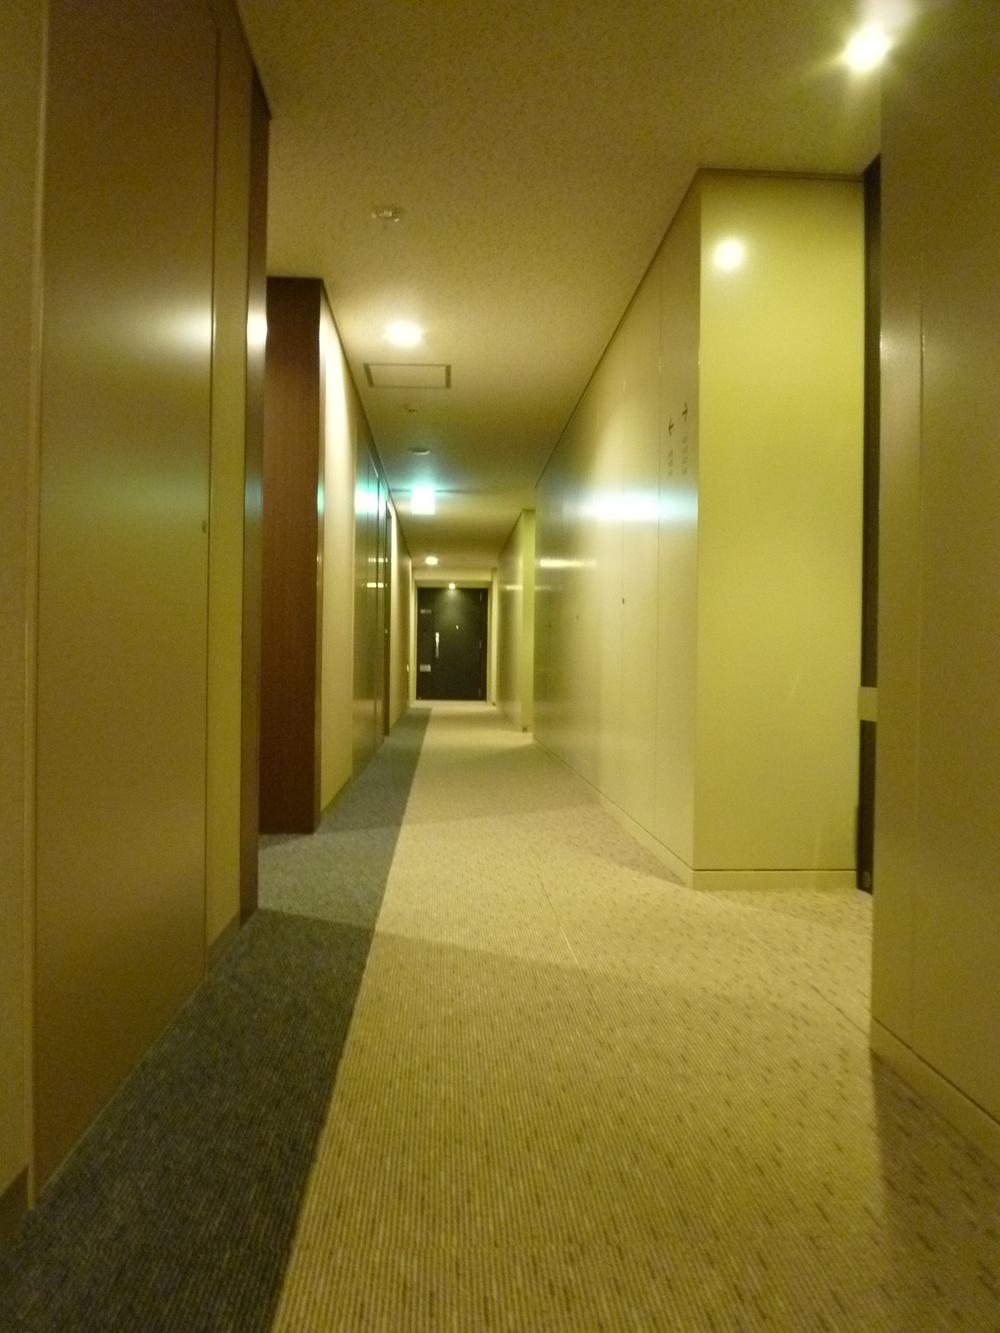 Other common areas. The inner corridor hotel like